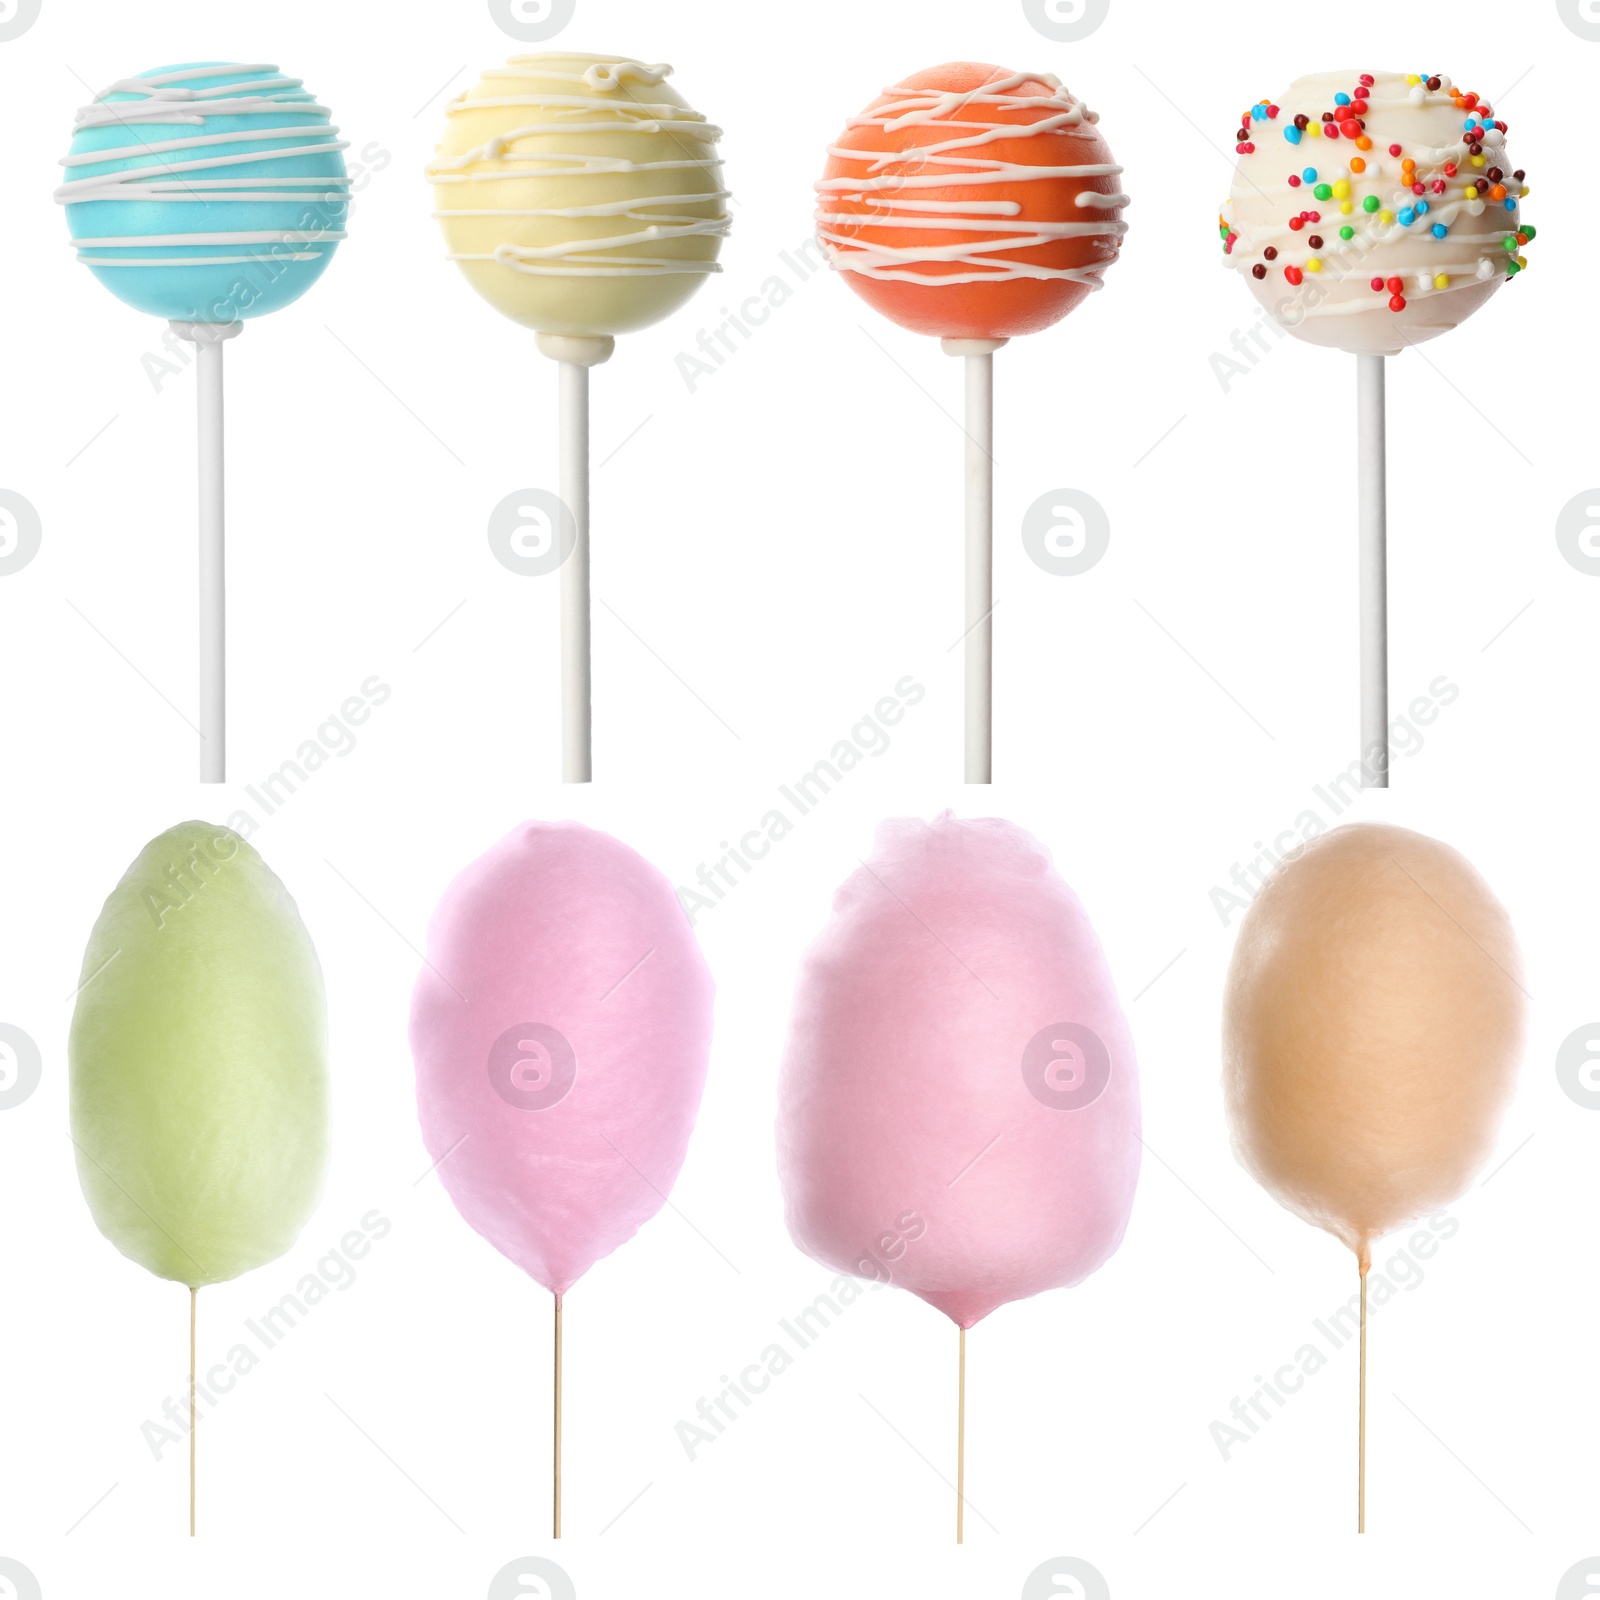 Image of Tasty cake pops and cotton candies isolated on white, set